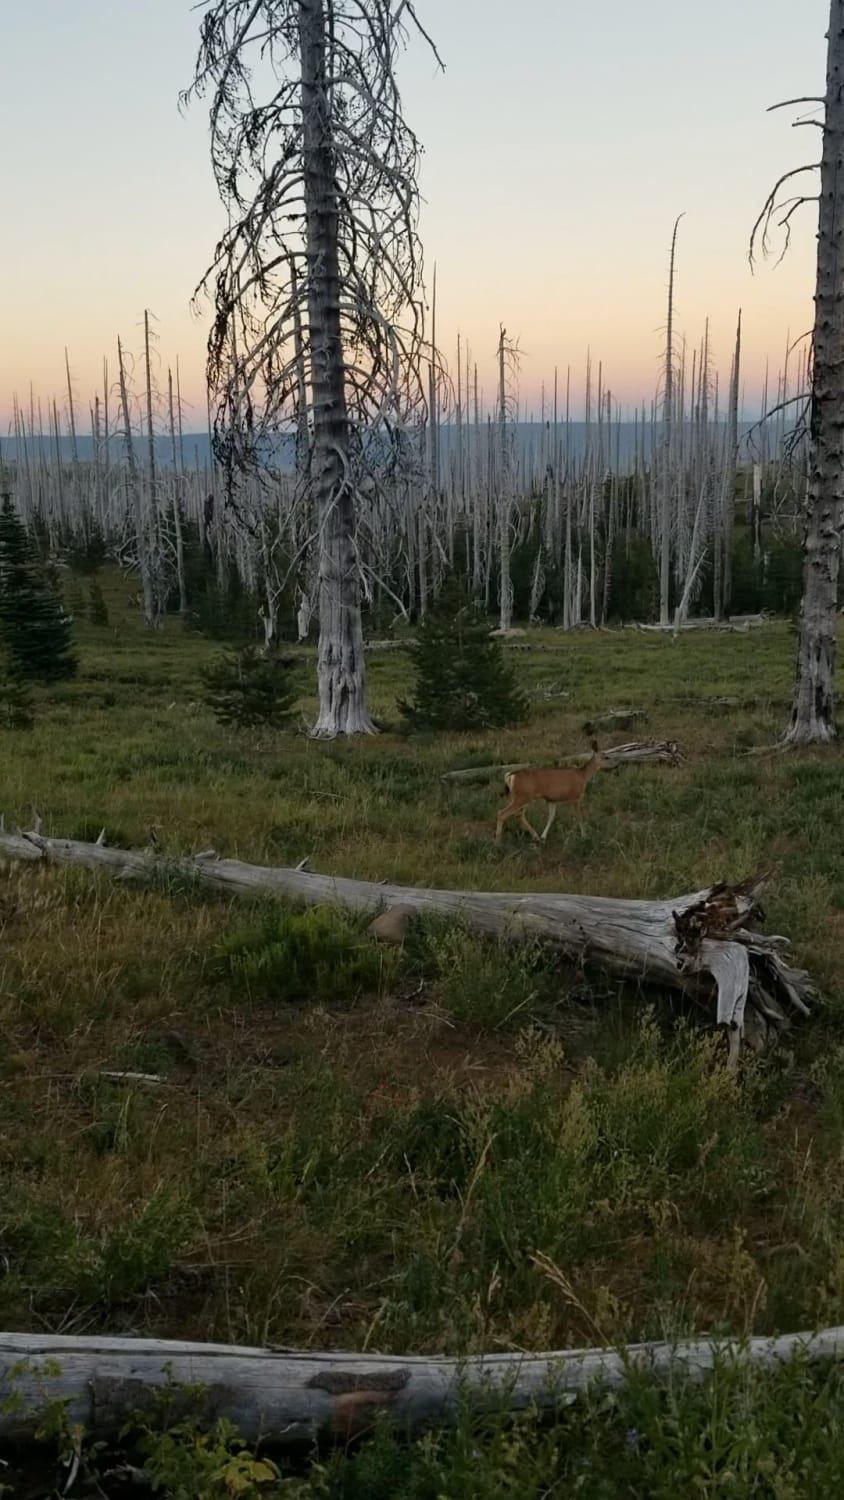 A minute of peace as the sun goes down in Oregon, USA. This was filmed backpacking in the Three Finger Jack Wilderness this summer.